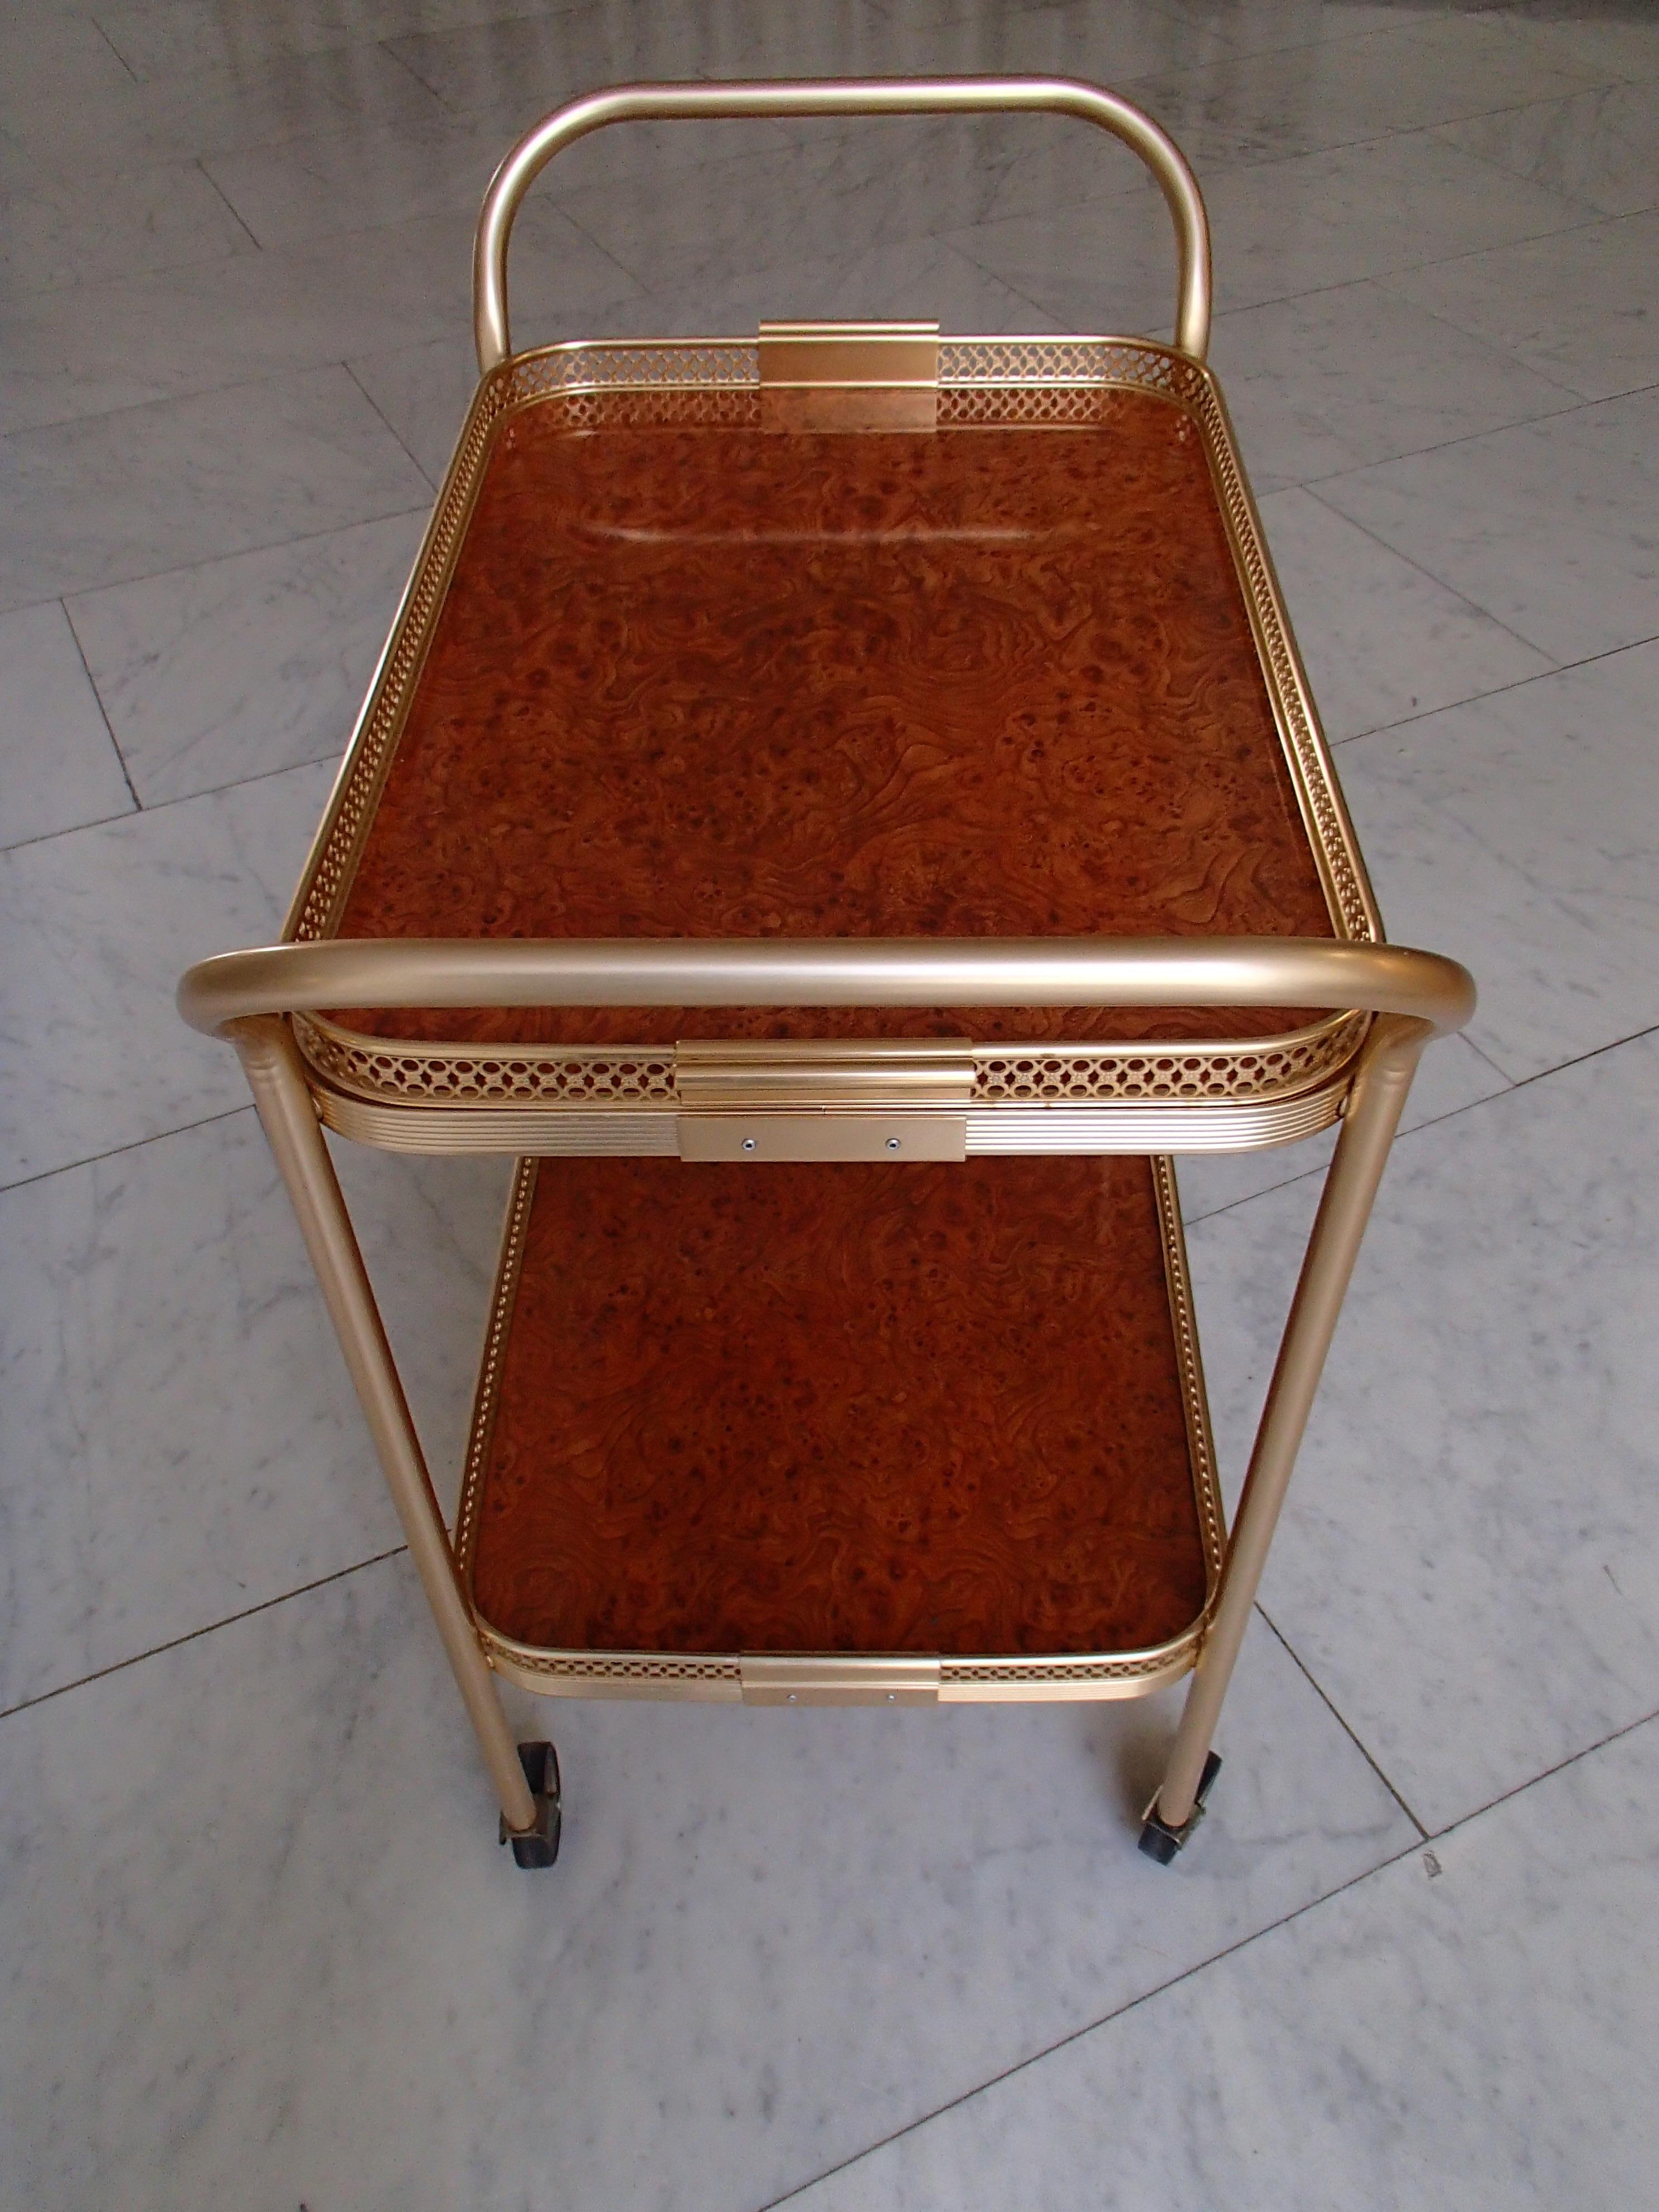 Modern Kaymet Bar Cart with Maple Eye and Decorative Edges In Good Condition For Sale In Weiningen, CH